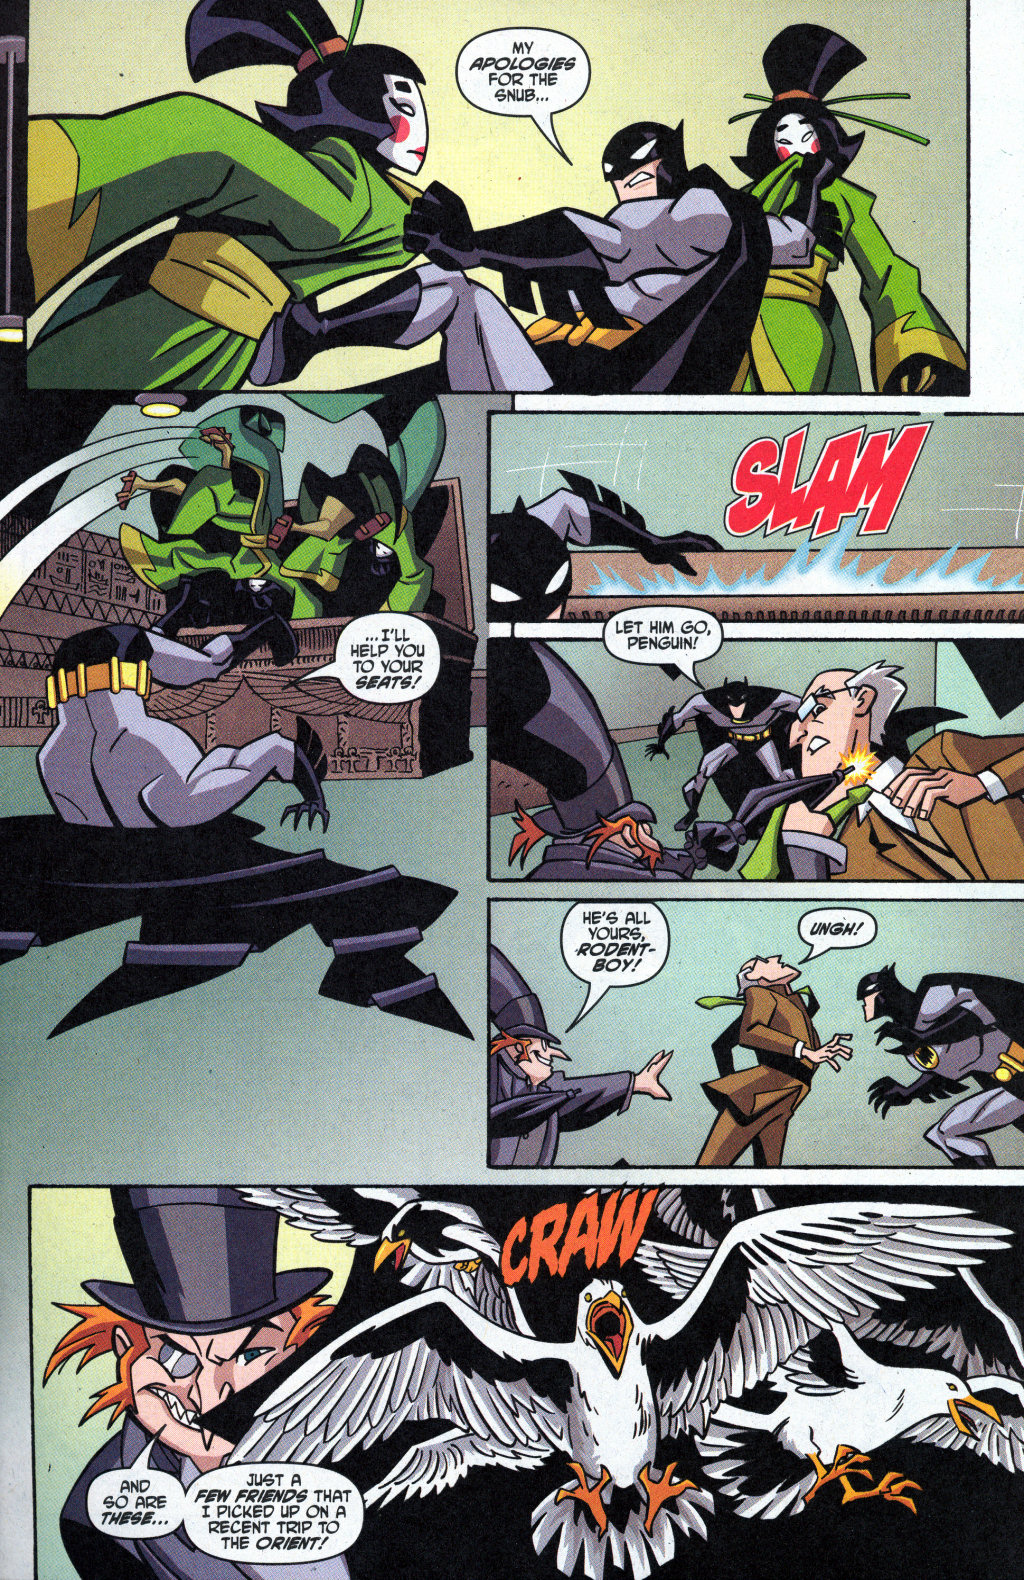 The Batman Strikes! issue 1 (Burger King Giveaway Edition) - Page 11